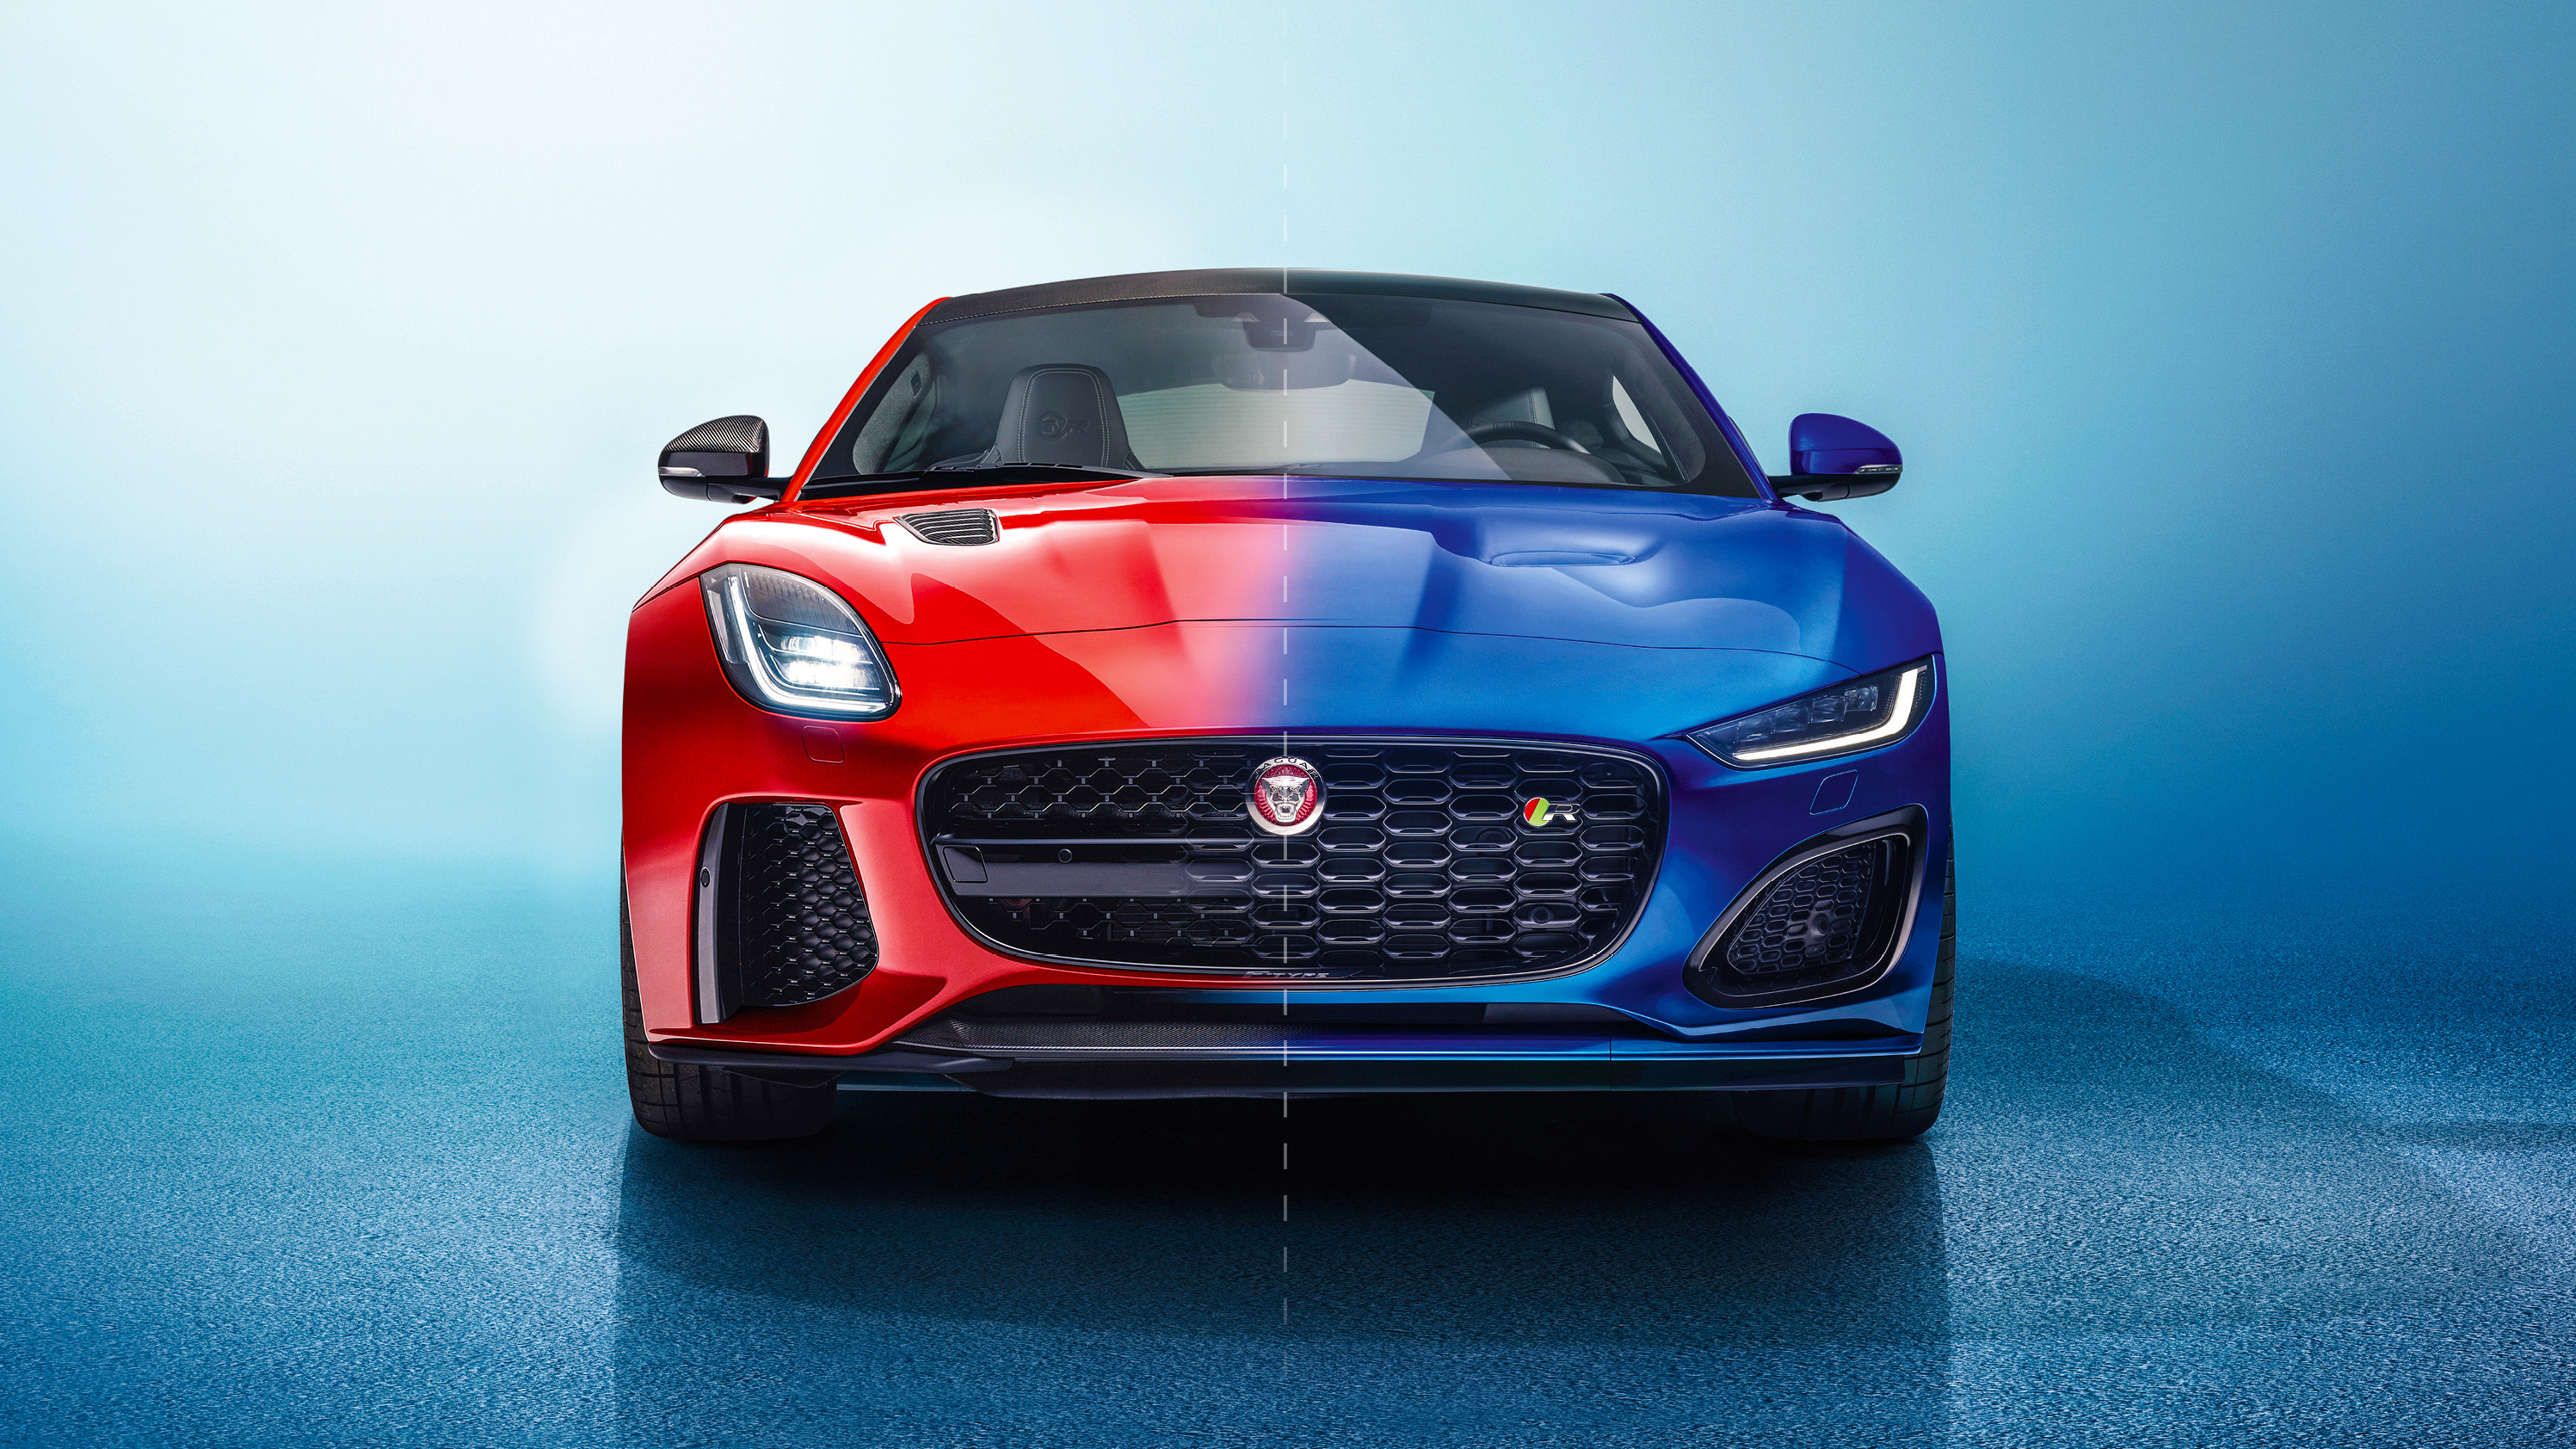 Jaguar F-Type: old face or new? | Top Gear